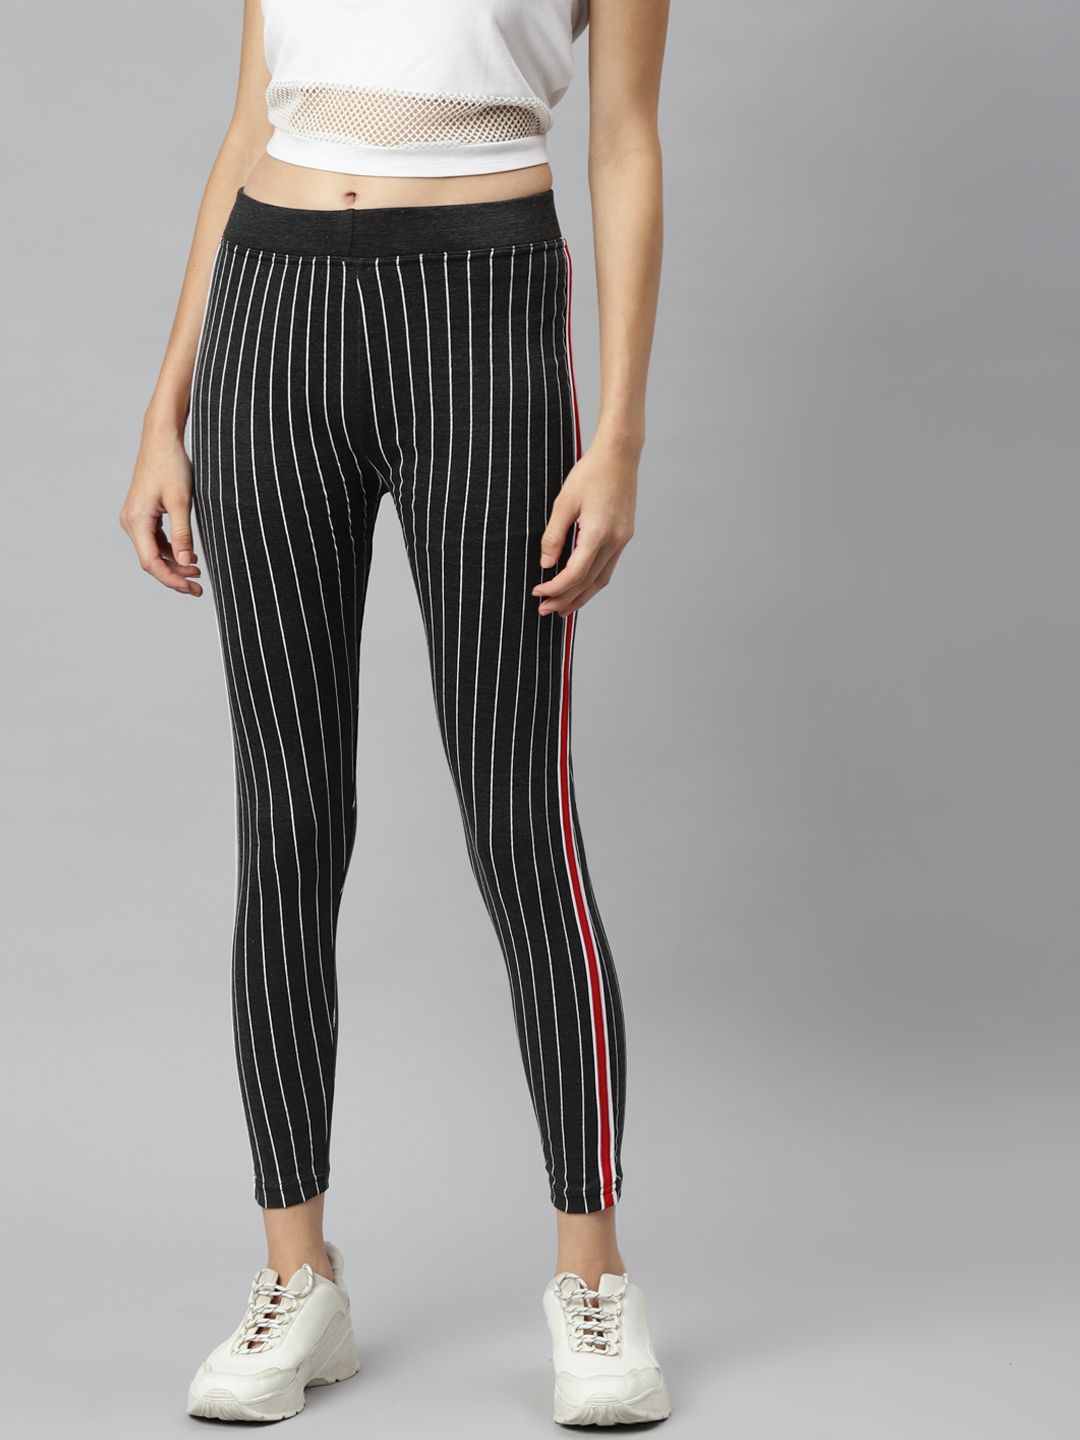 Aarika Women Charcoal Grey & Red Striped Rapid-Dry Track Pants Price in India